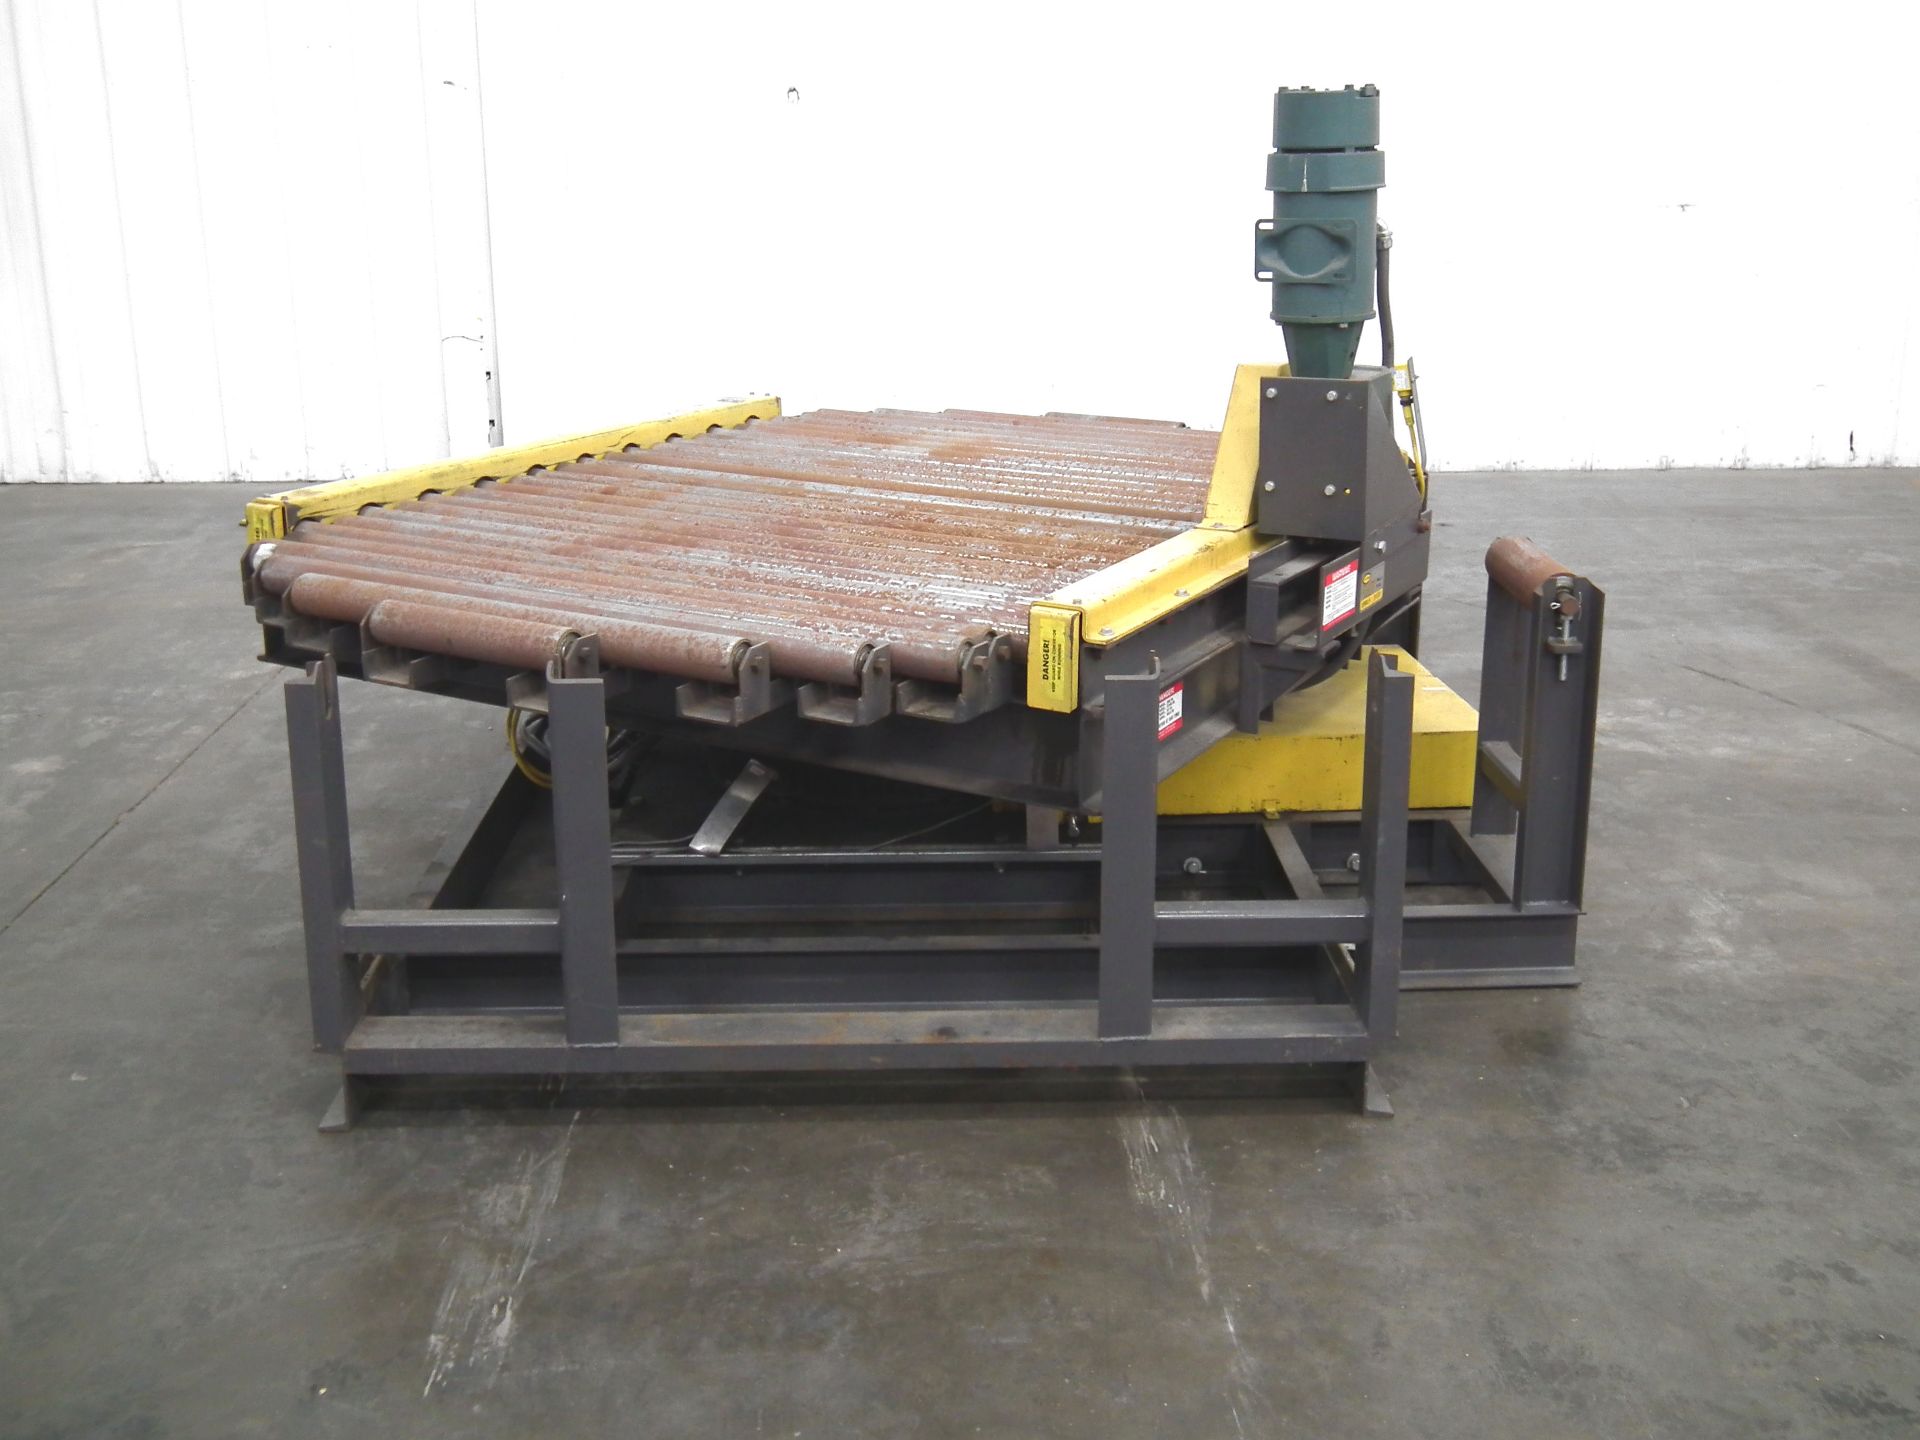 Hytrol Turntable for Full Pallets 90 Degree Motion A9776 - Image 2 of 8